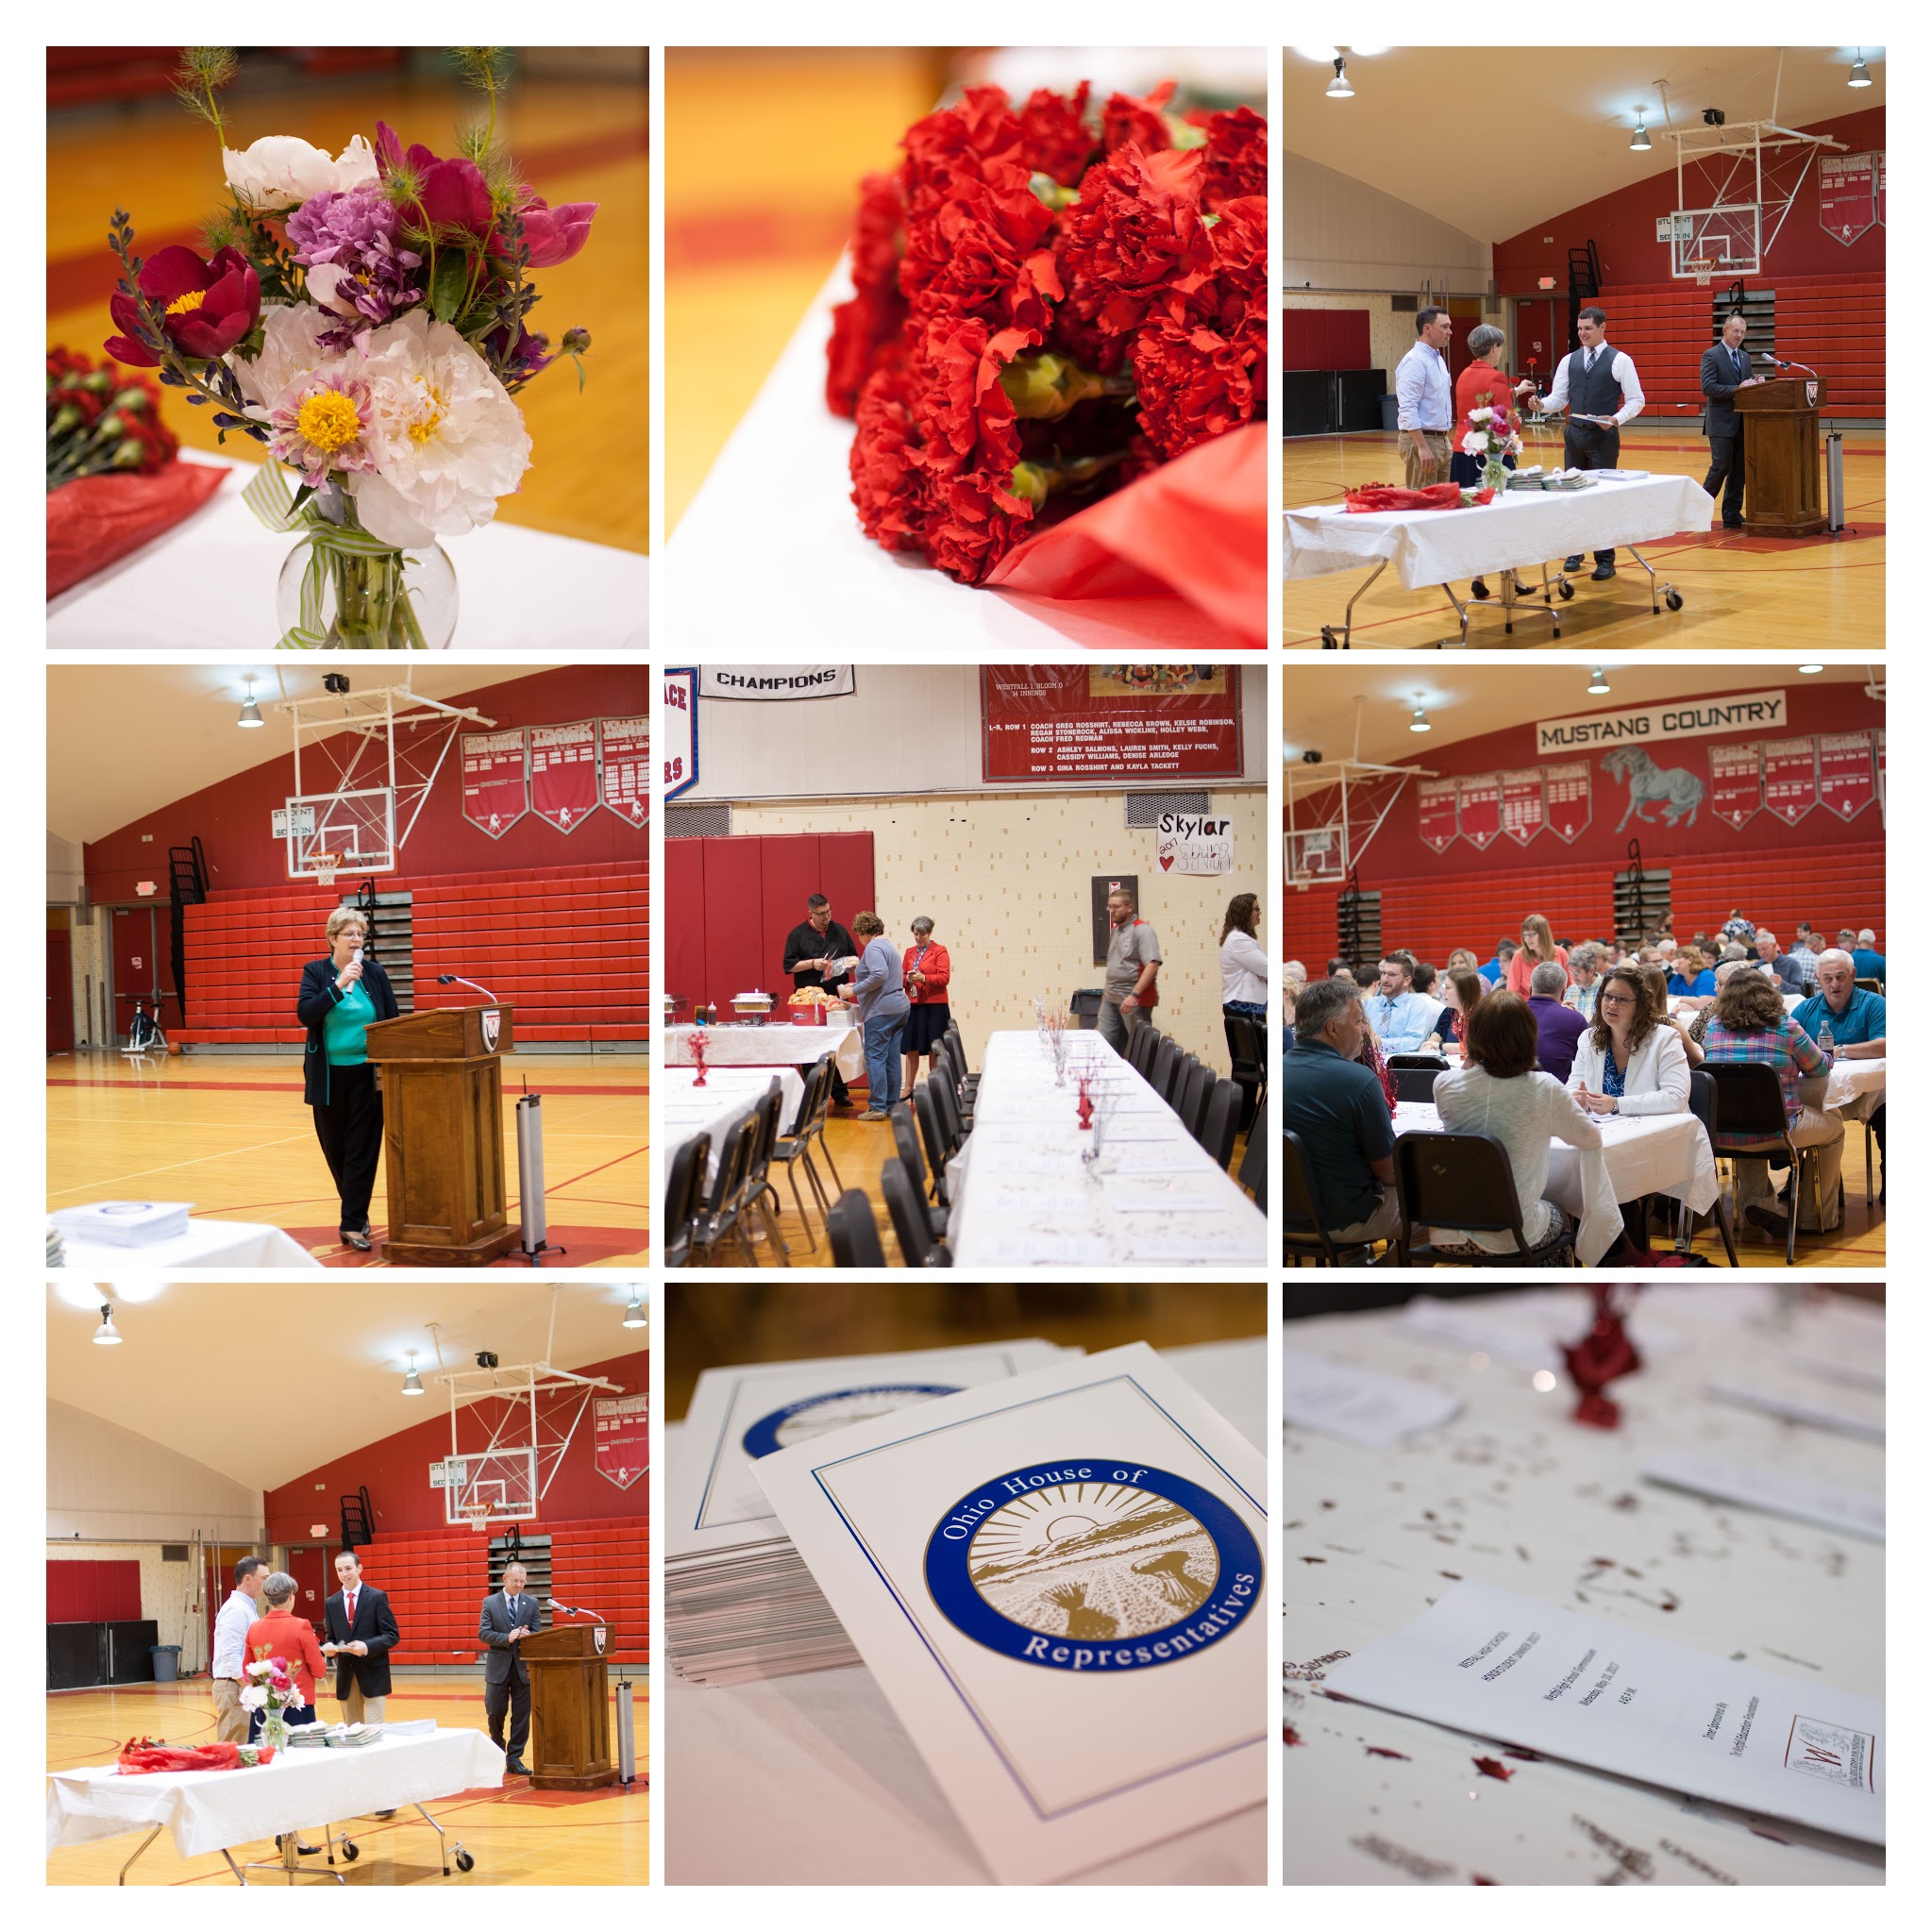 Photos of students and families enjoying dinner and accepting awards.